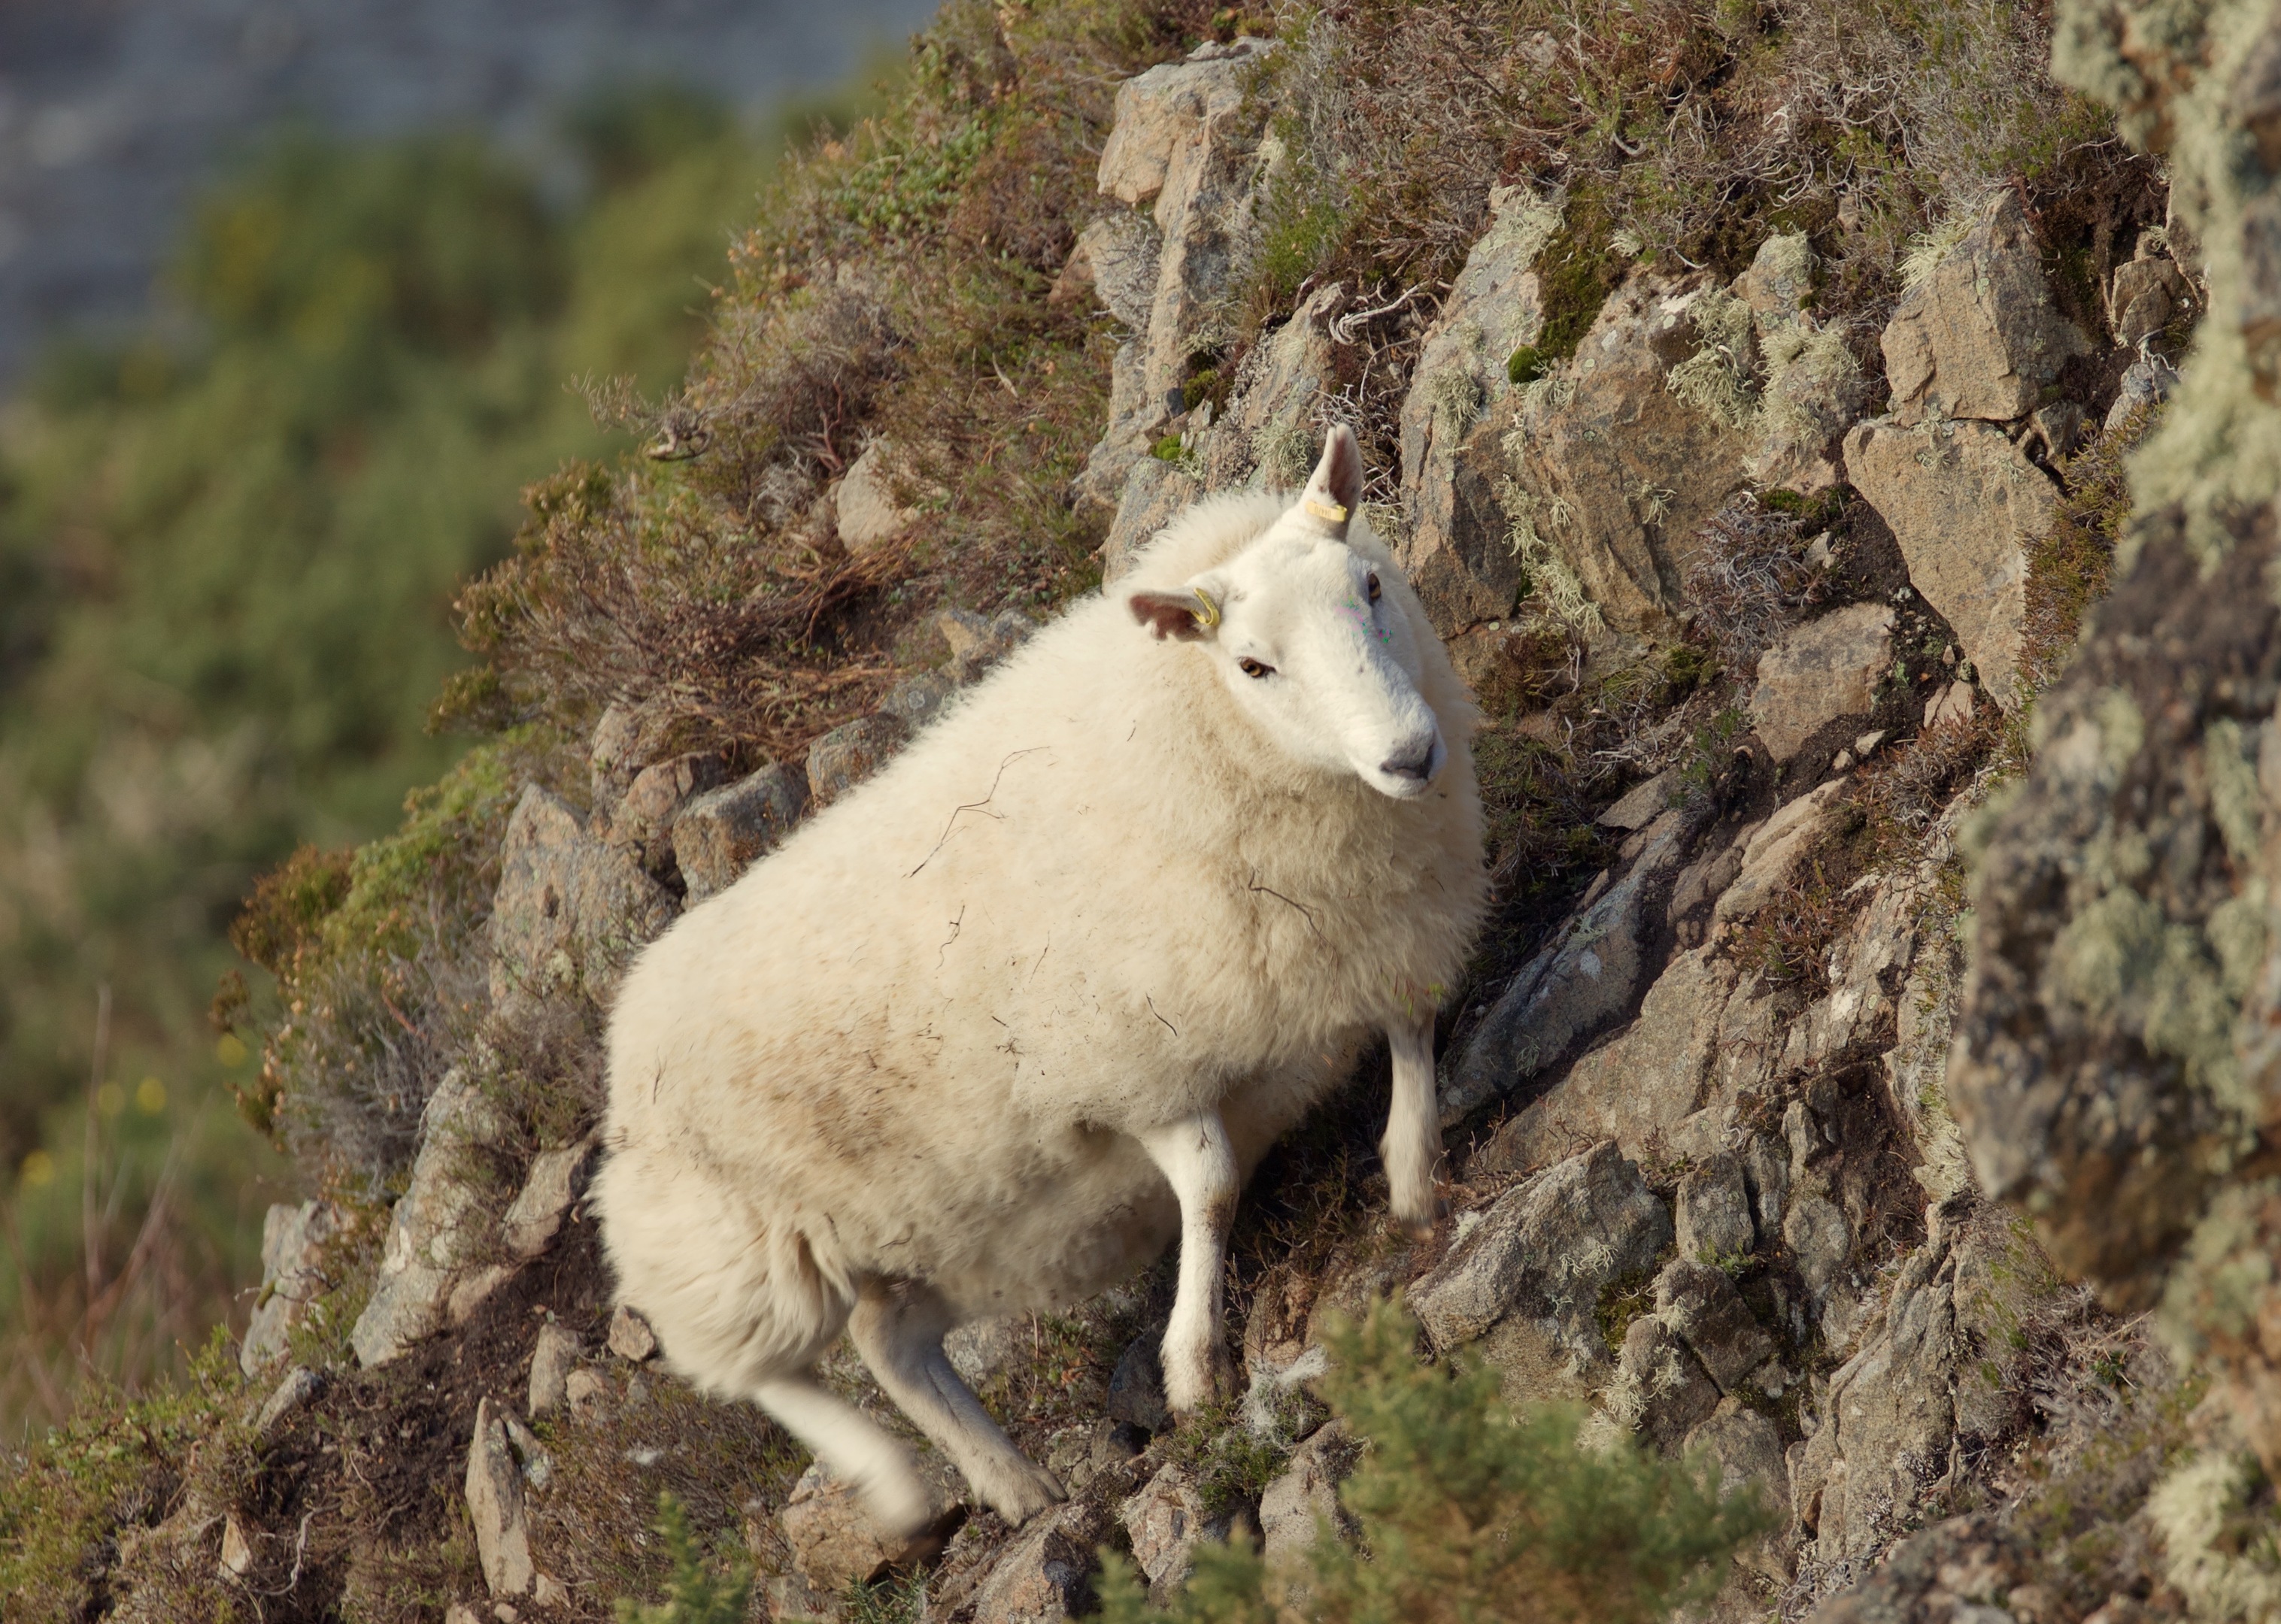 Some seem to grudge the presence of sheep in the hills